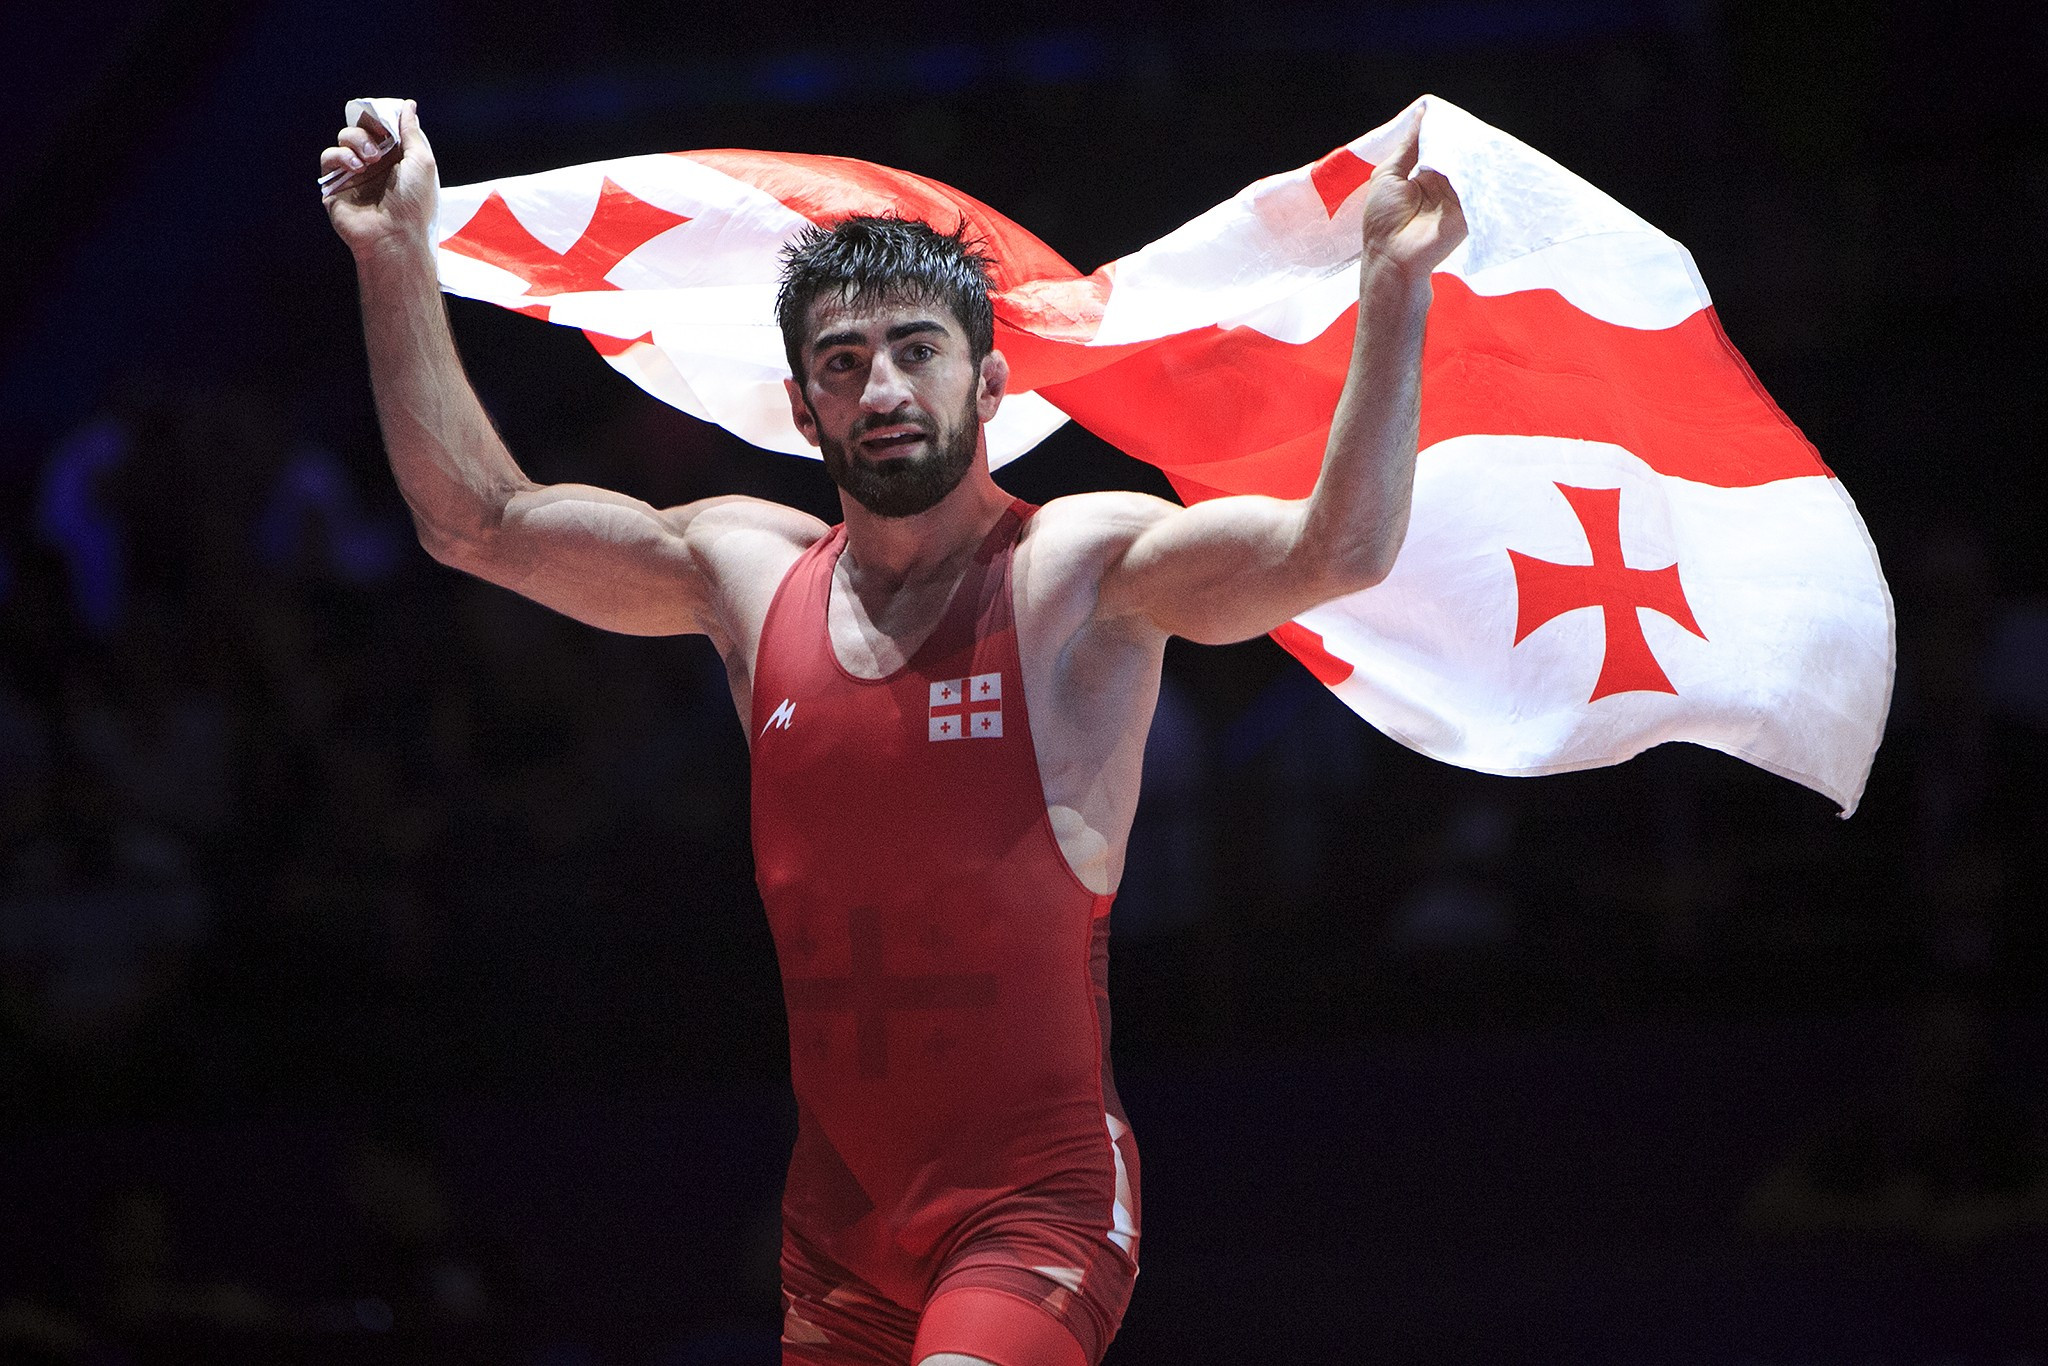 The win for Iakobishvili handed Georgia their second gold of the Championships ©UWW